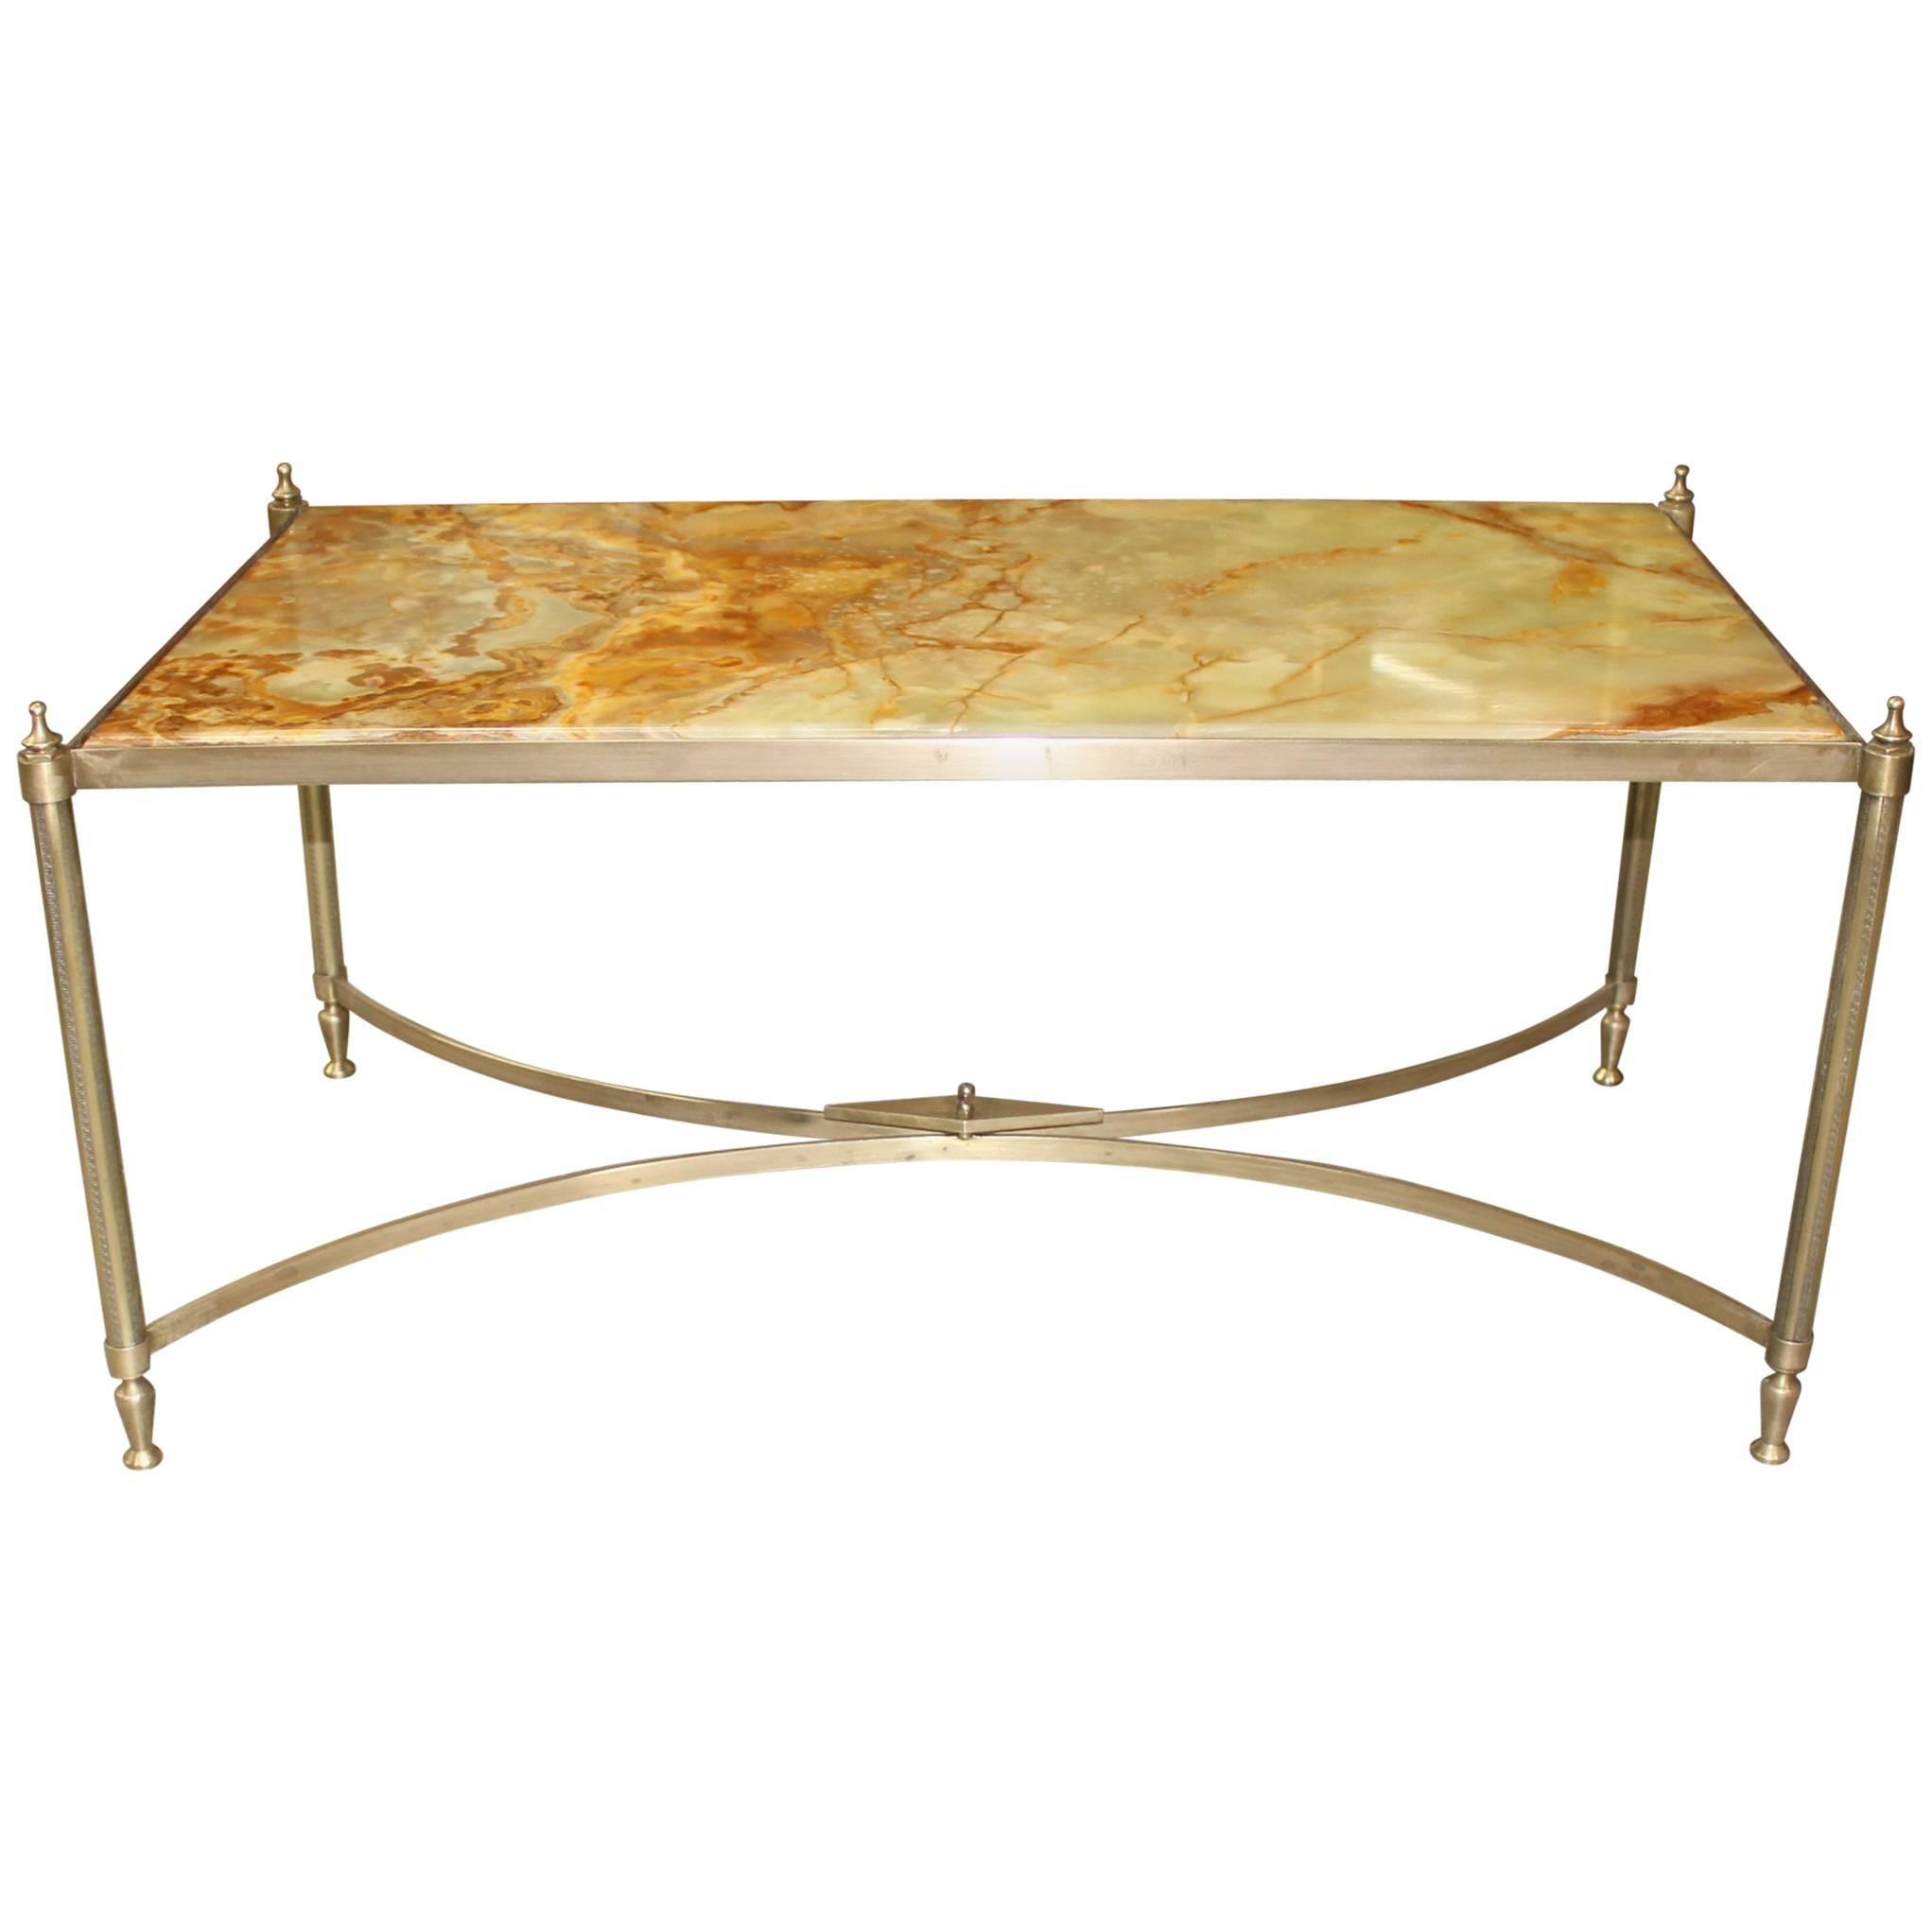 French Maison Jansen Coffee or Cocktail Table Bronze Rectangular with Onyx Top